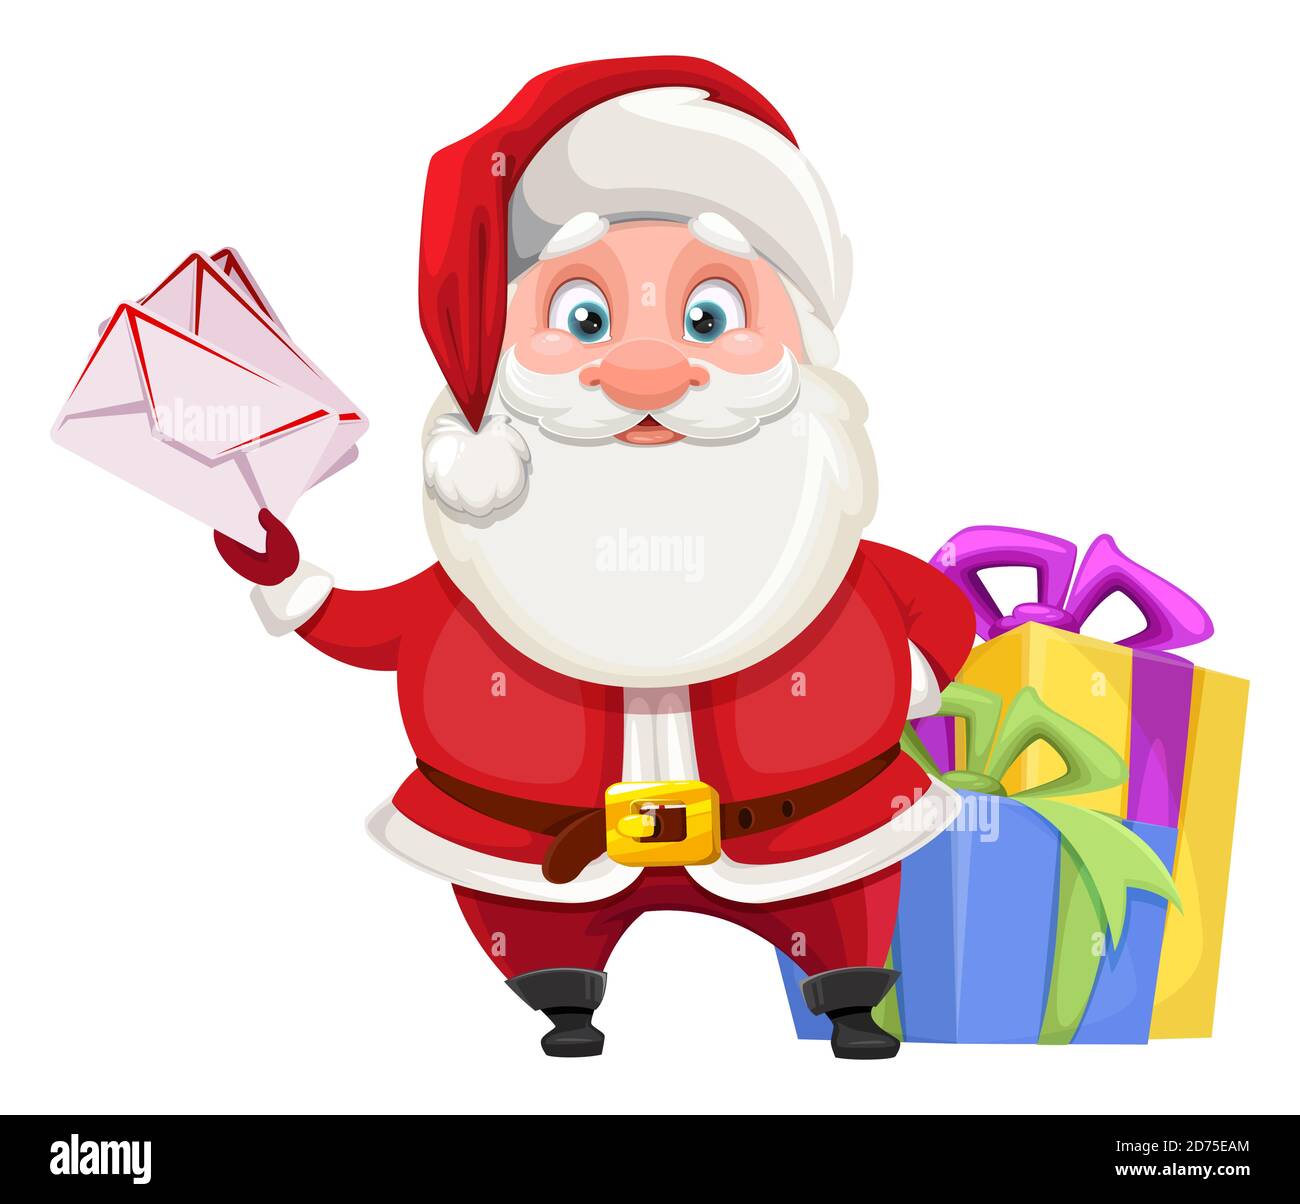 Merry Christmas and Happy New Year. Cheerful Santa Claus preparing presents for kids. Vector illustration on white background Stock Vector